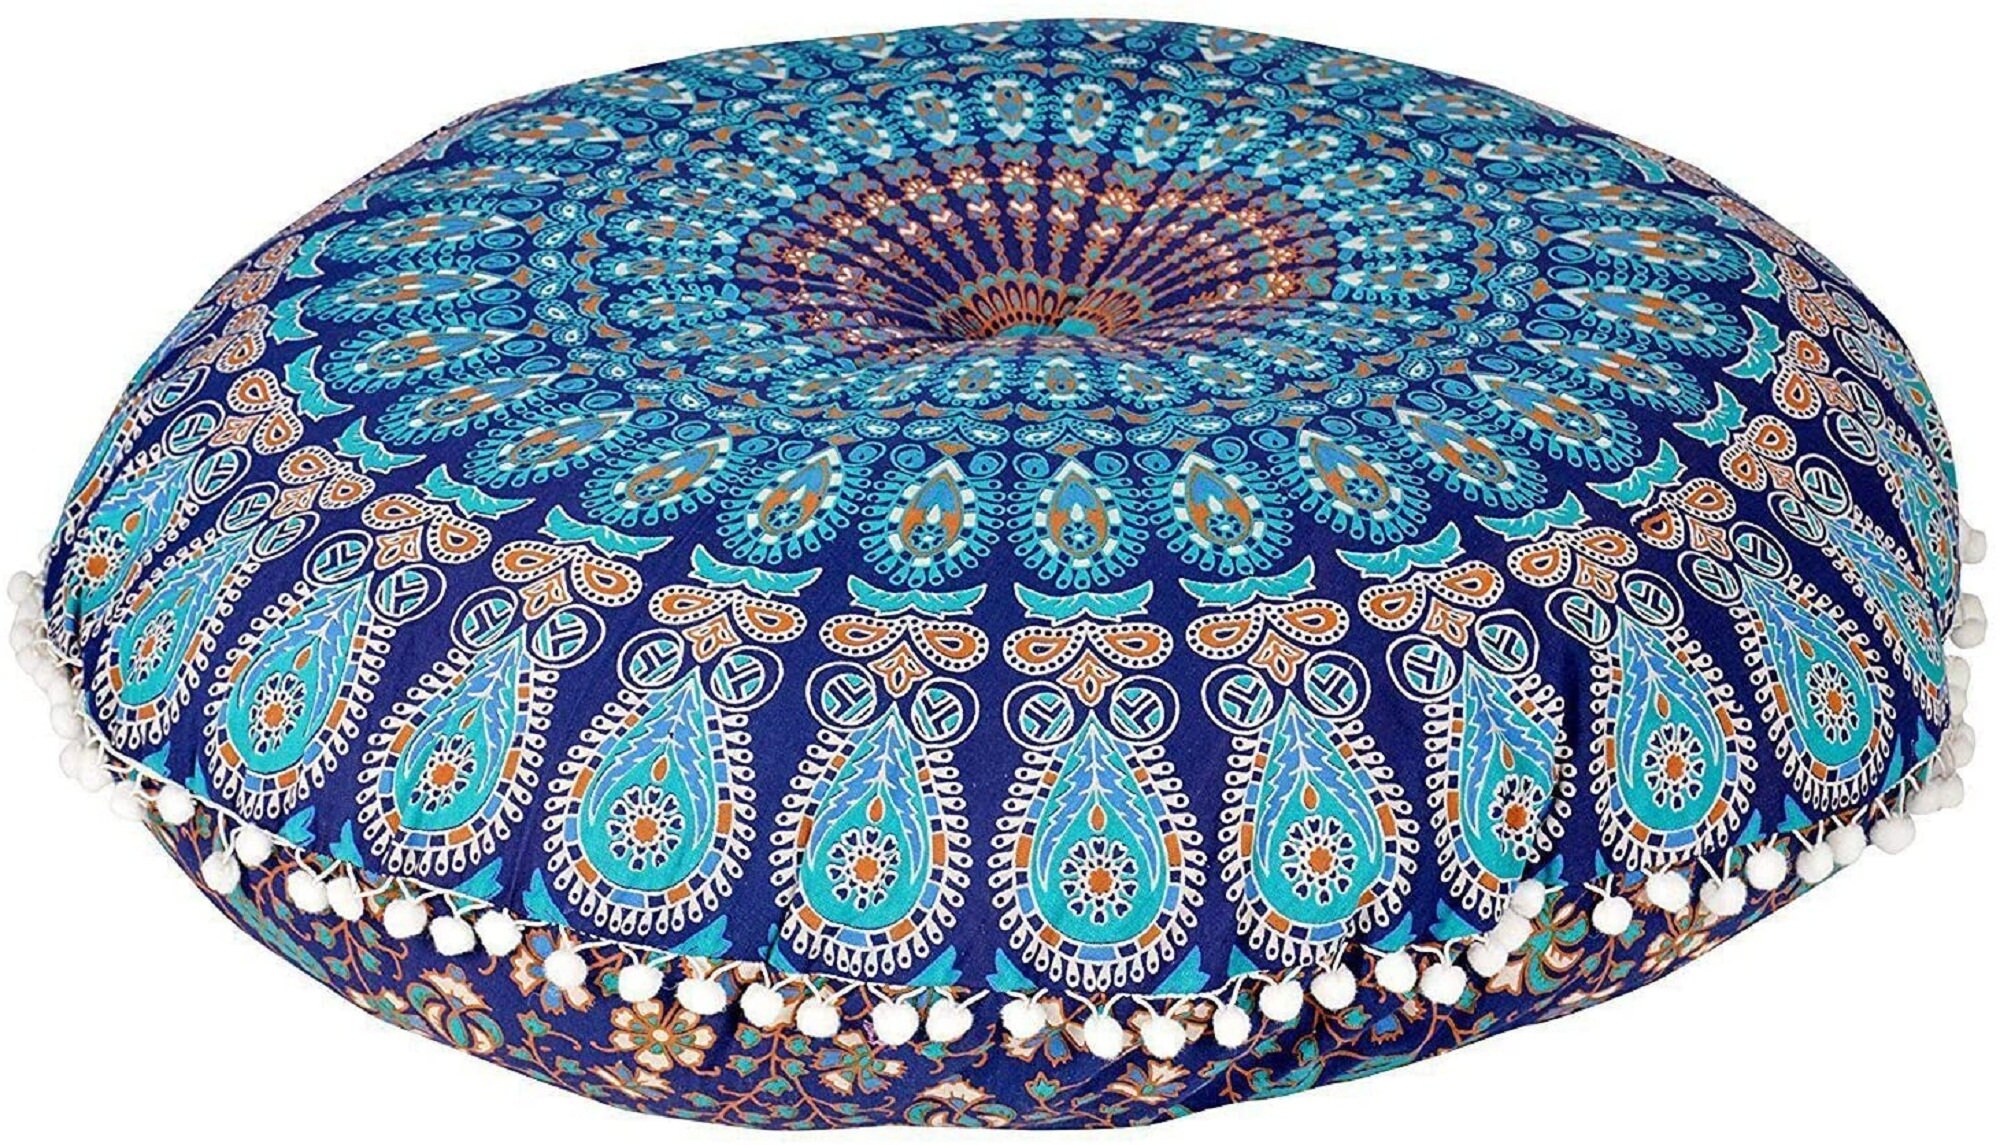 New 28" Indian Round Floor Cushion Pillow Cover Room Decor Pouf Covers Throw 